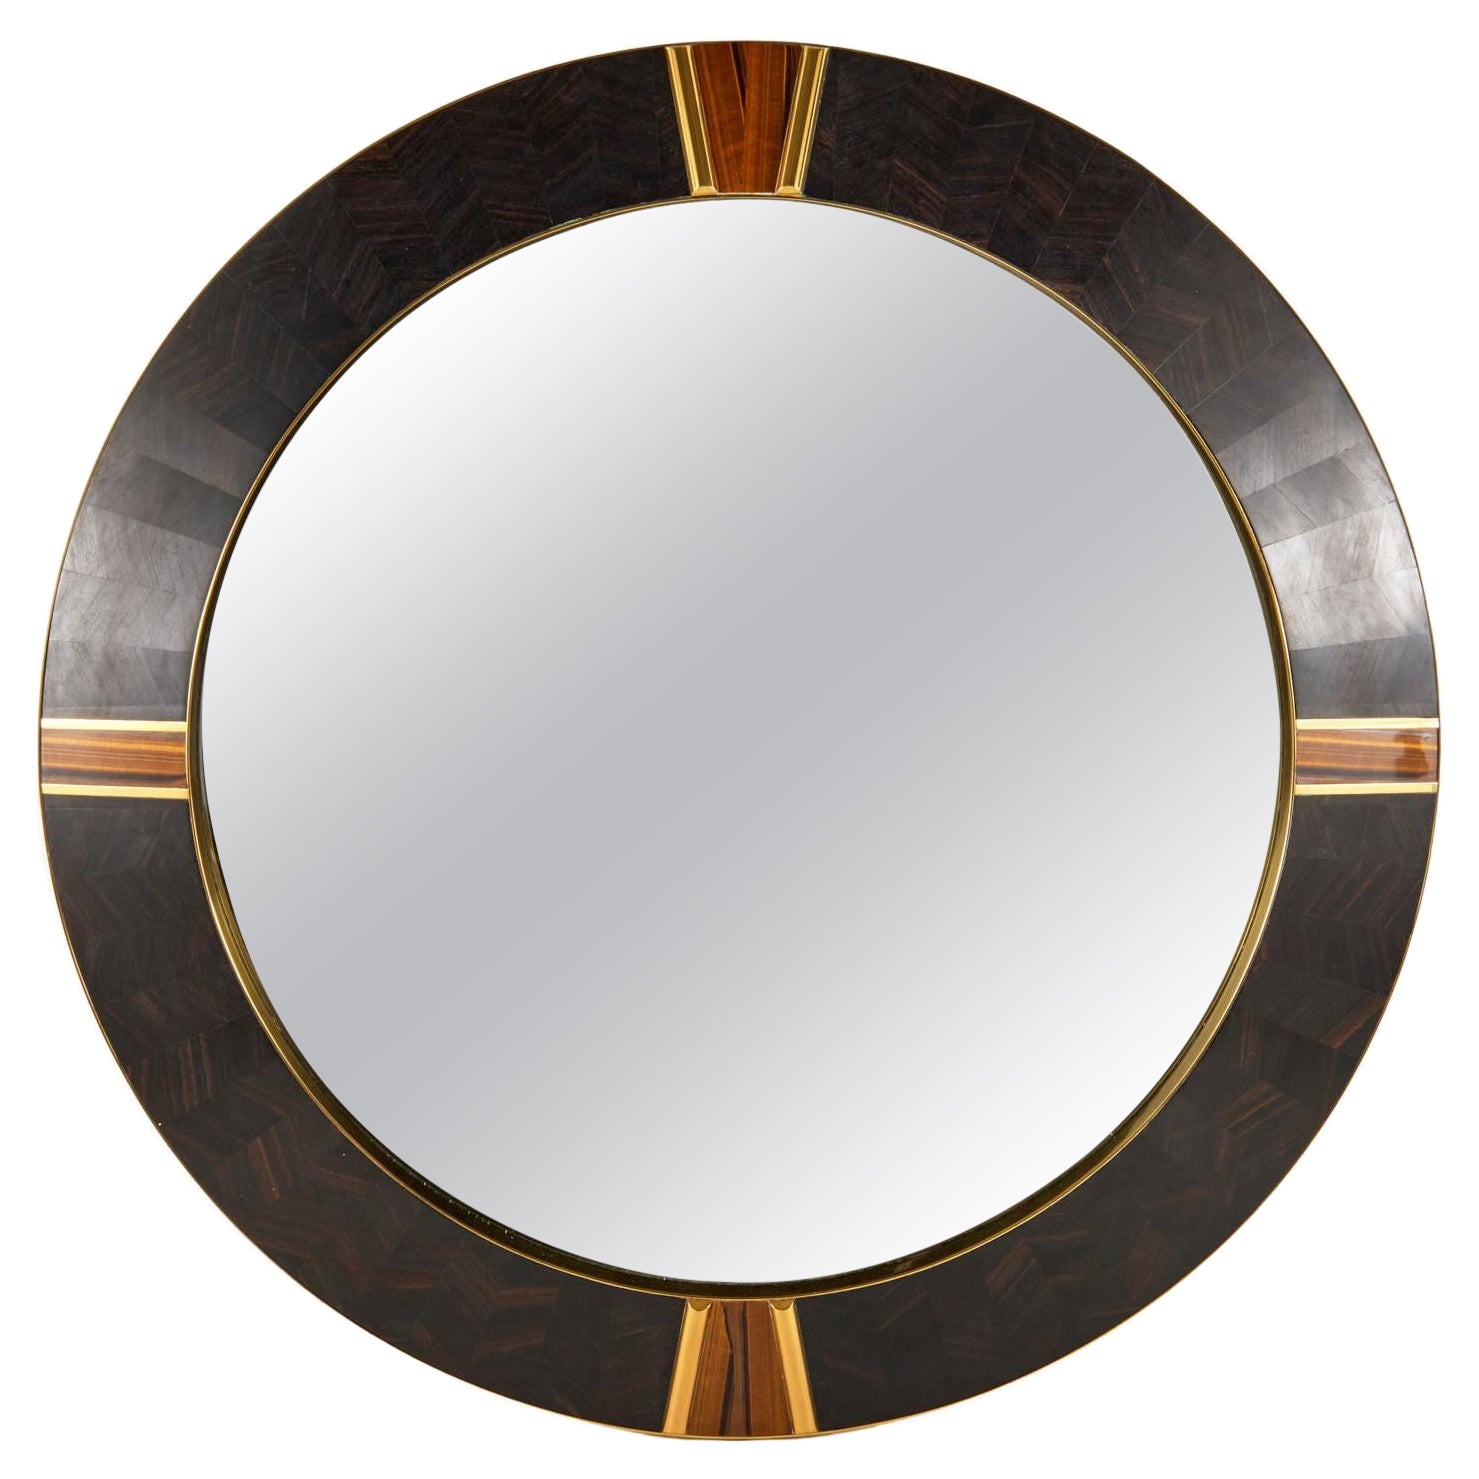 Important Modernist Circular Mirror Inlaid with Tiger Eye Stone Details For Sale